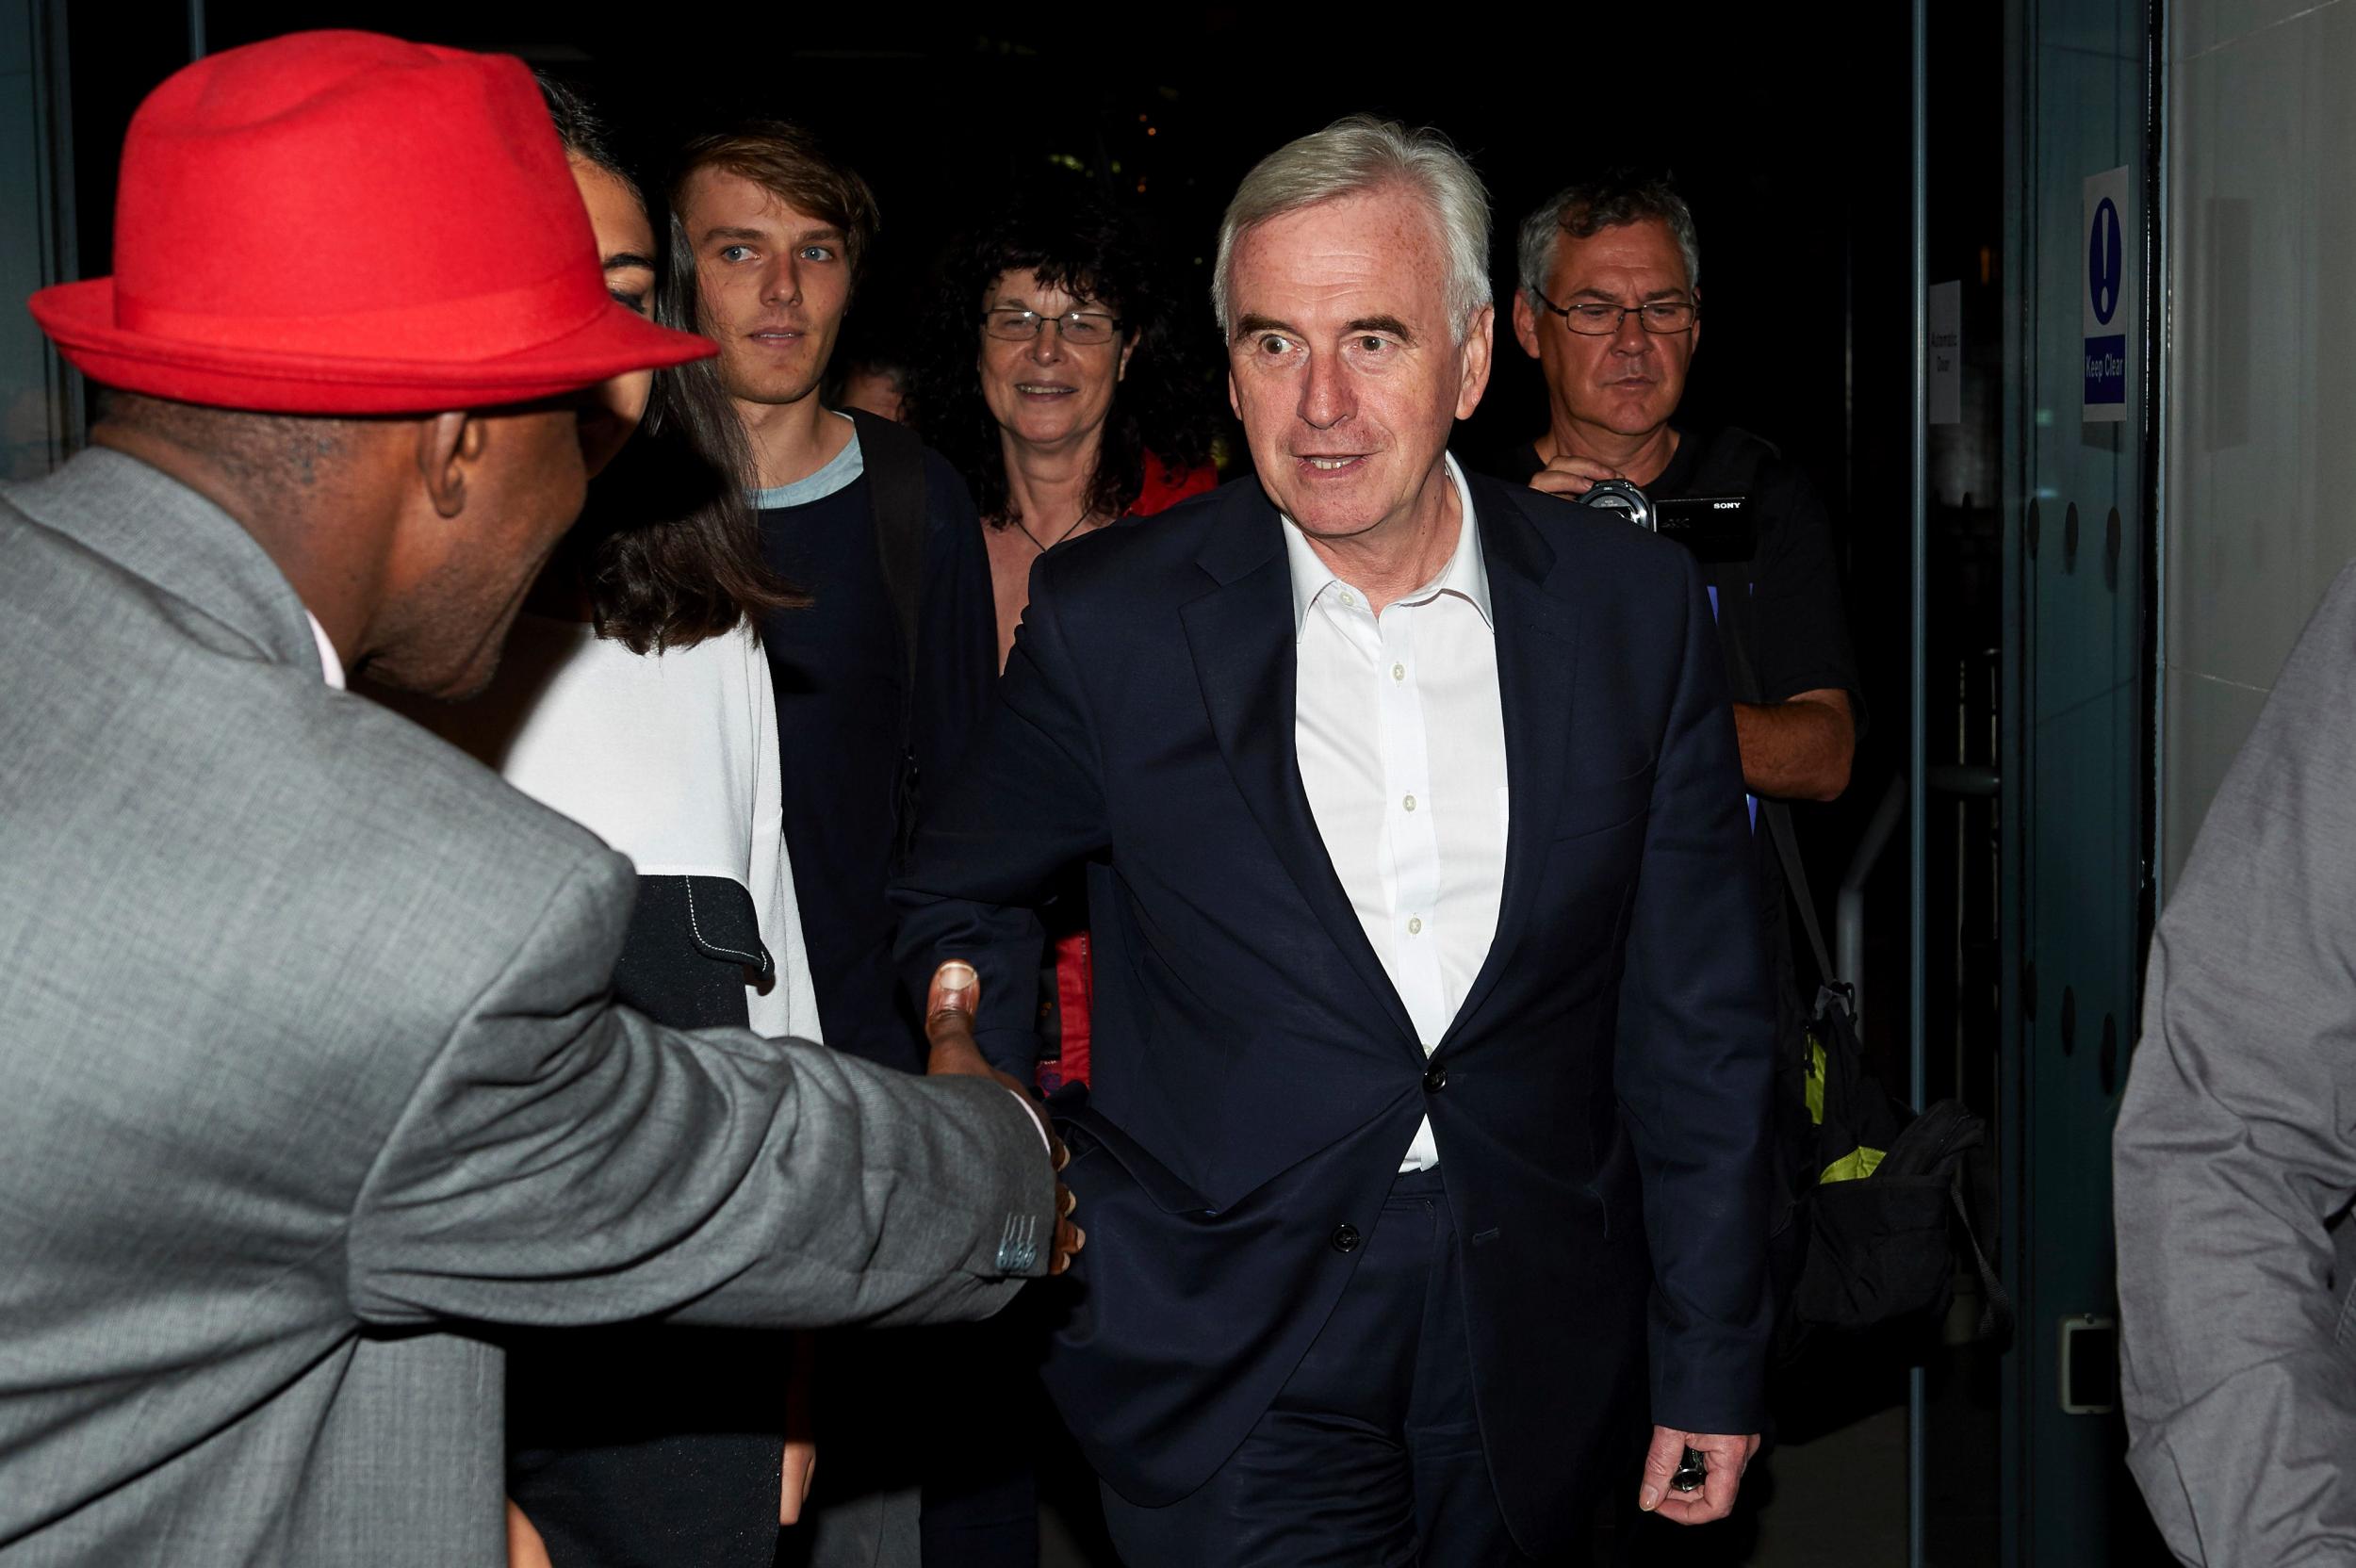 John McDonnell arrives at campaign rally in London on 20 September